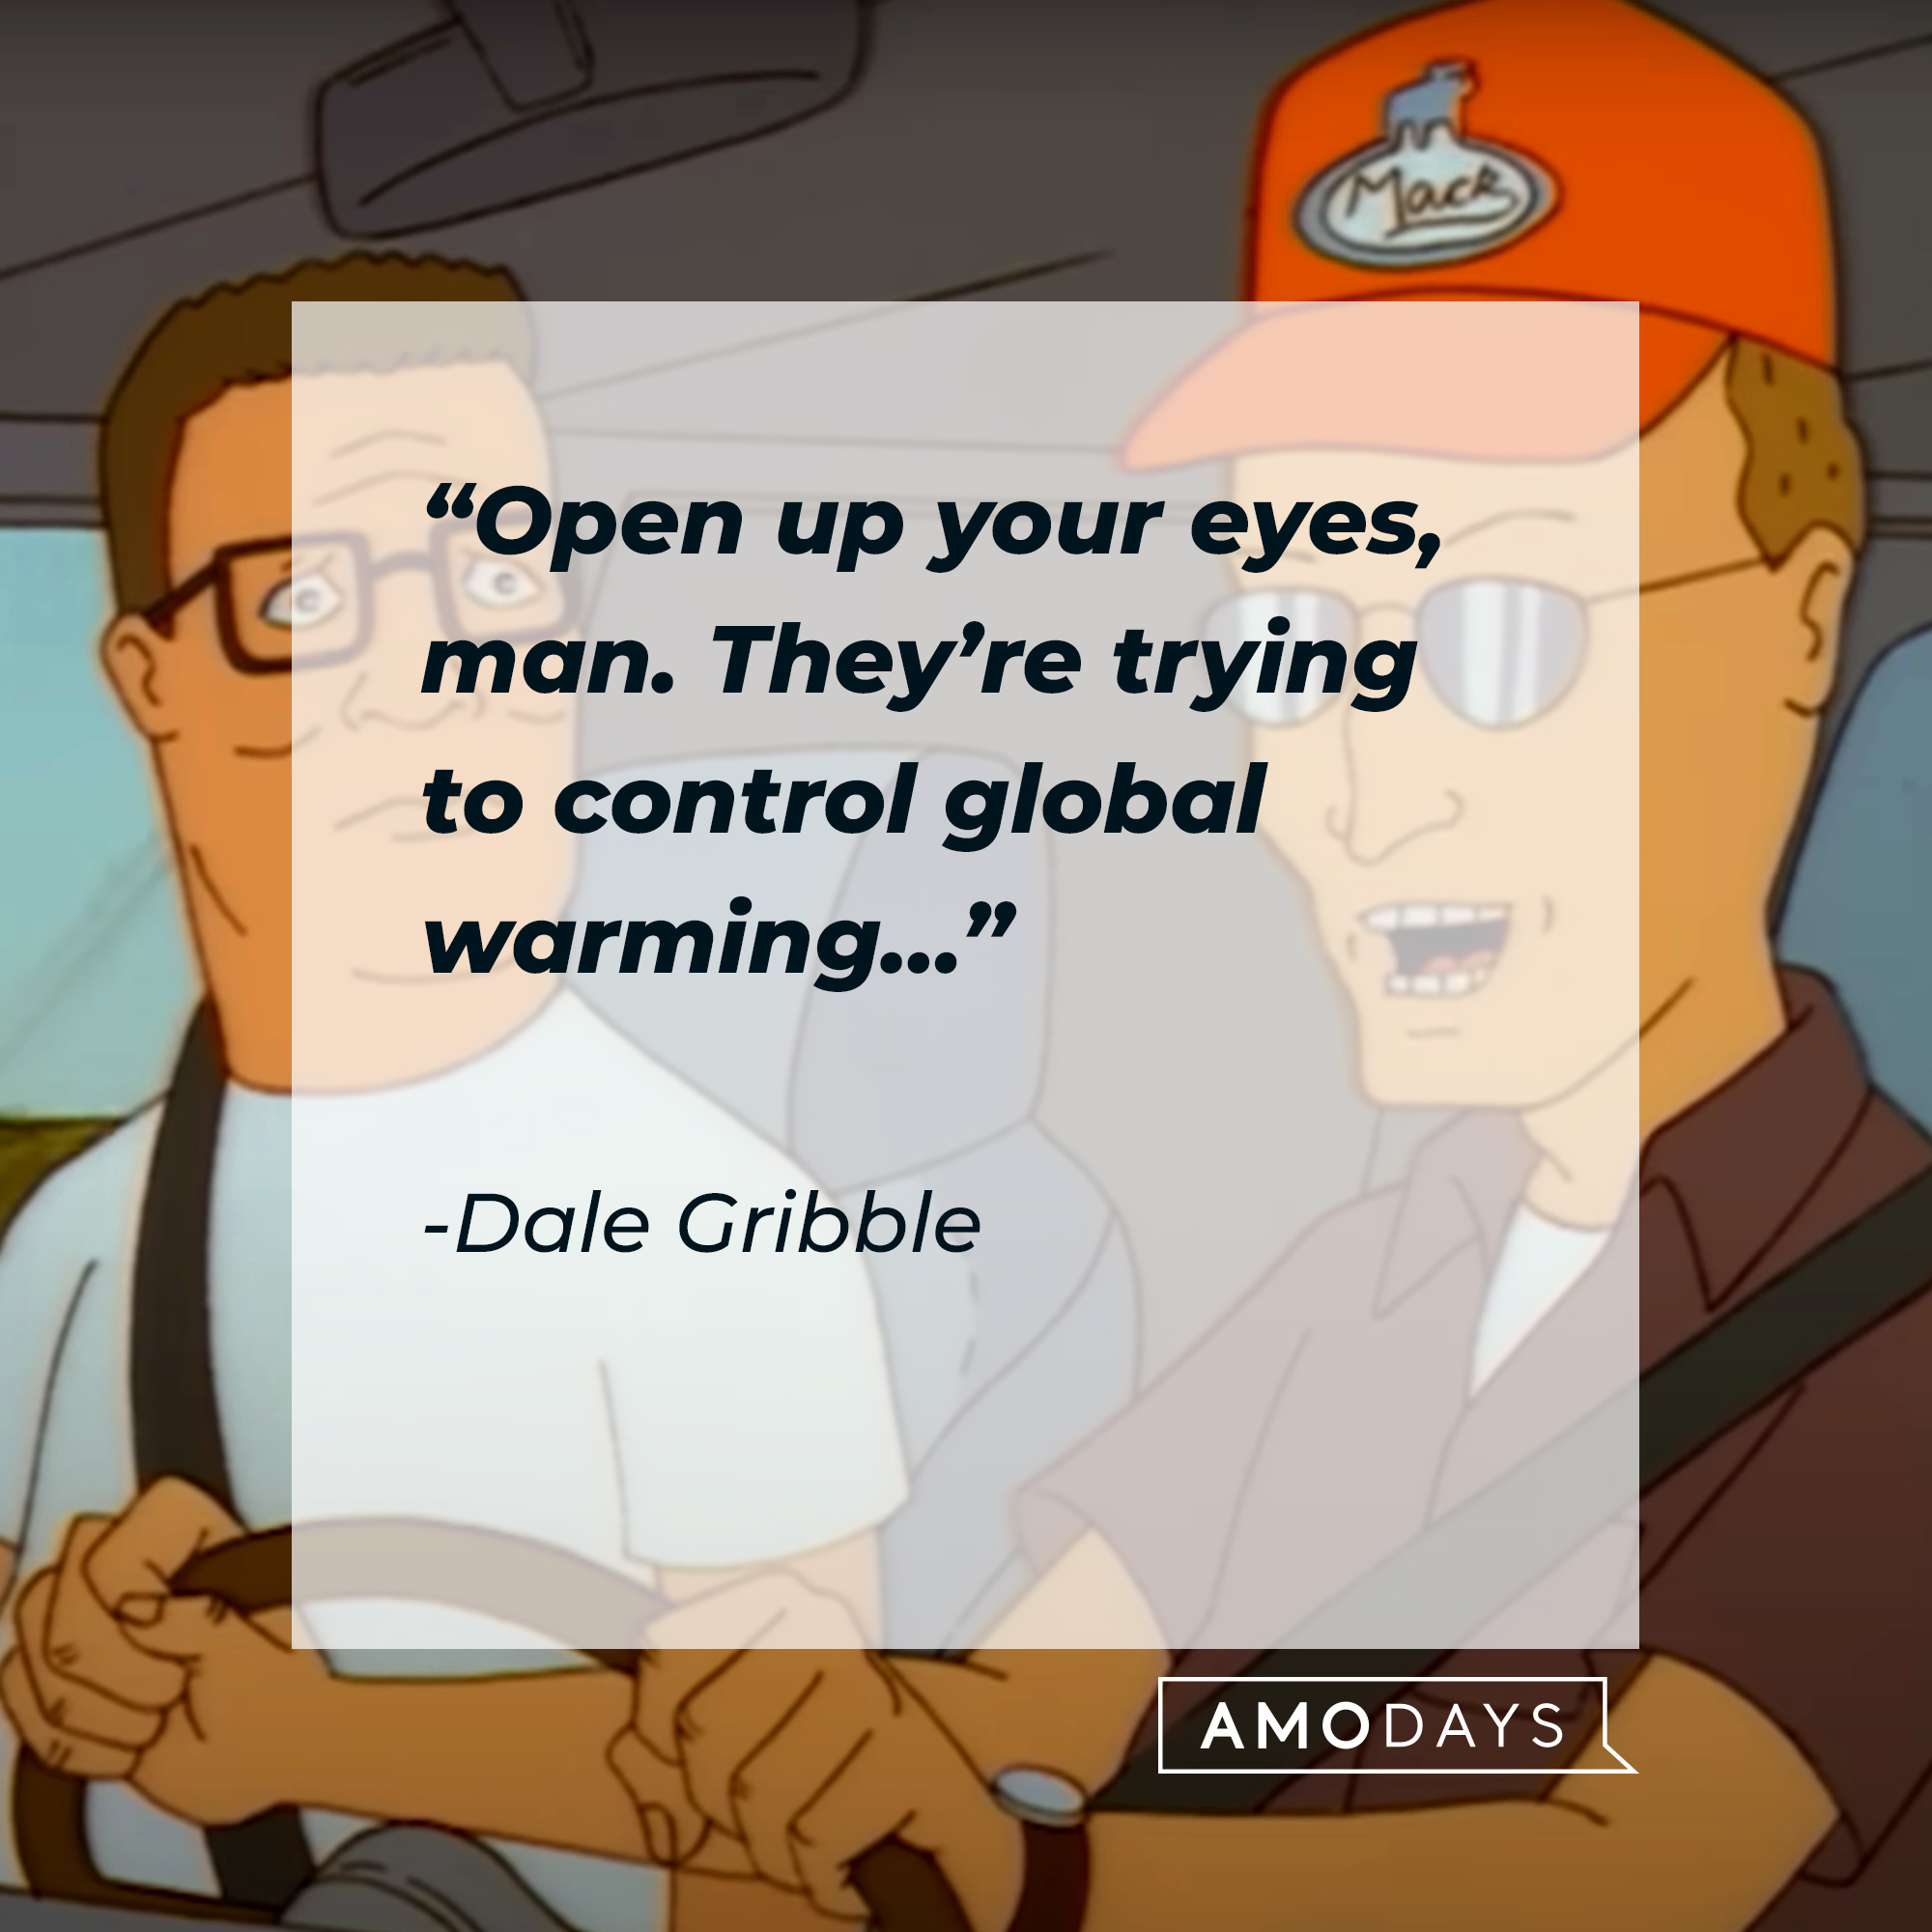 Dale Gribble  and another character from "King of the Hill," with his quote: “Open up your eyes, man. They’re trying to control global warming…” | Source: Youtube.com/adultswim